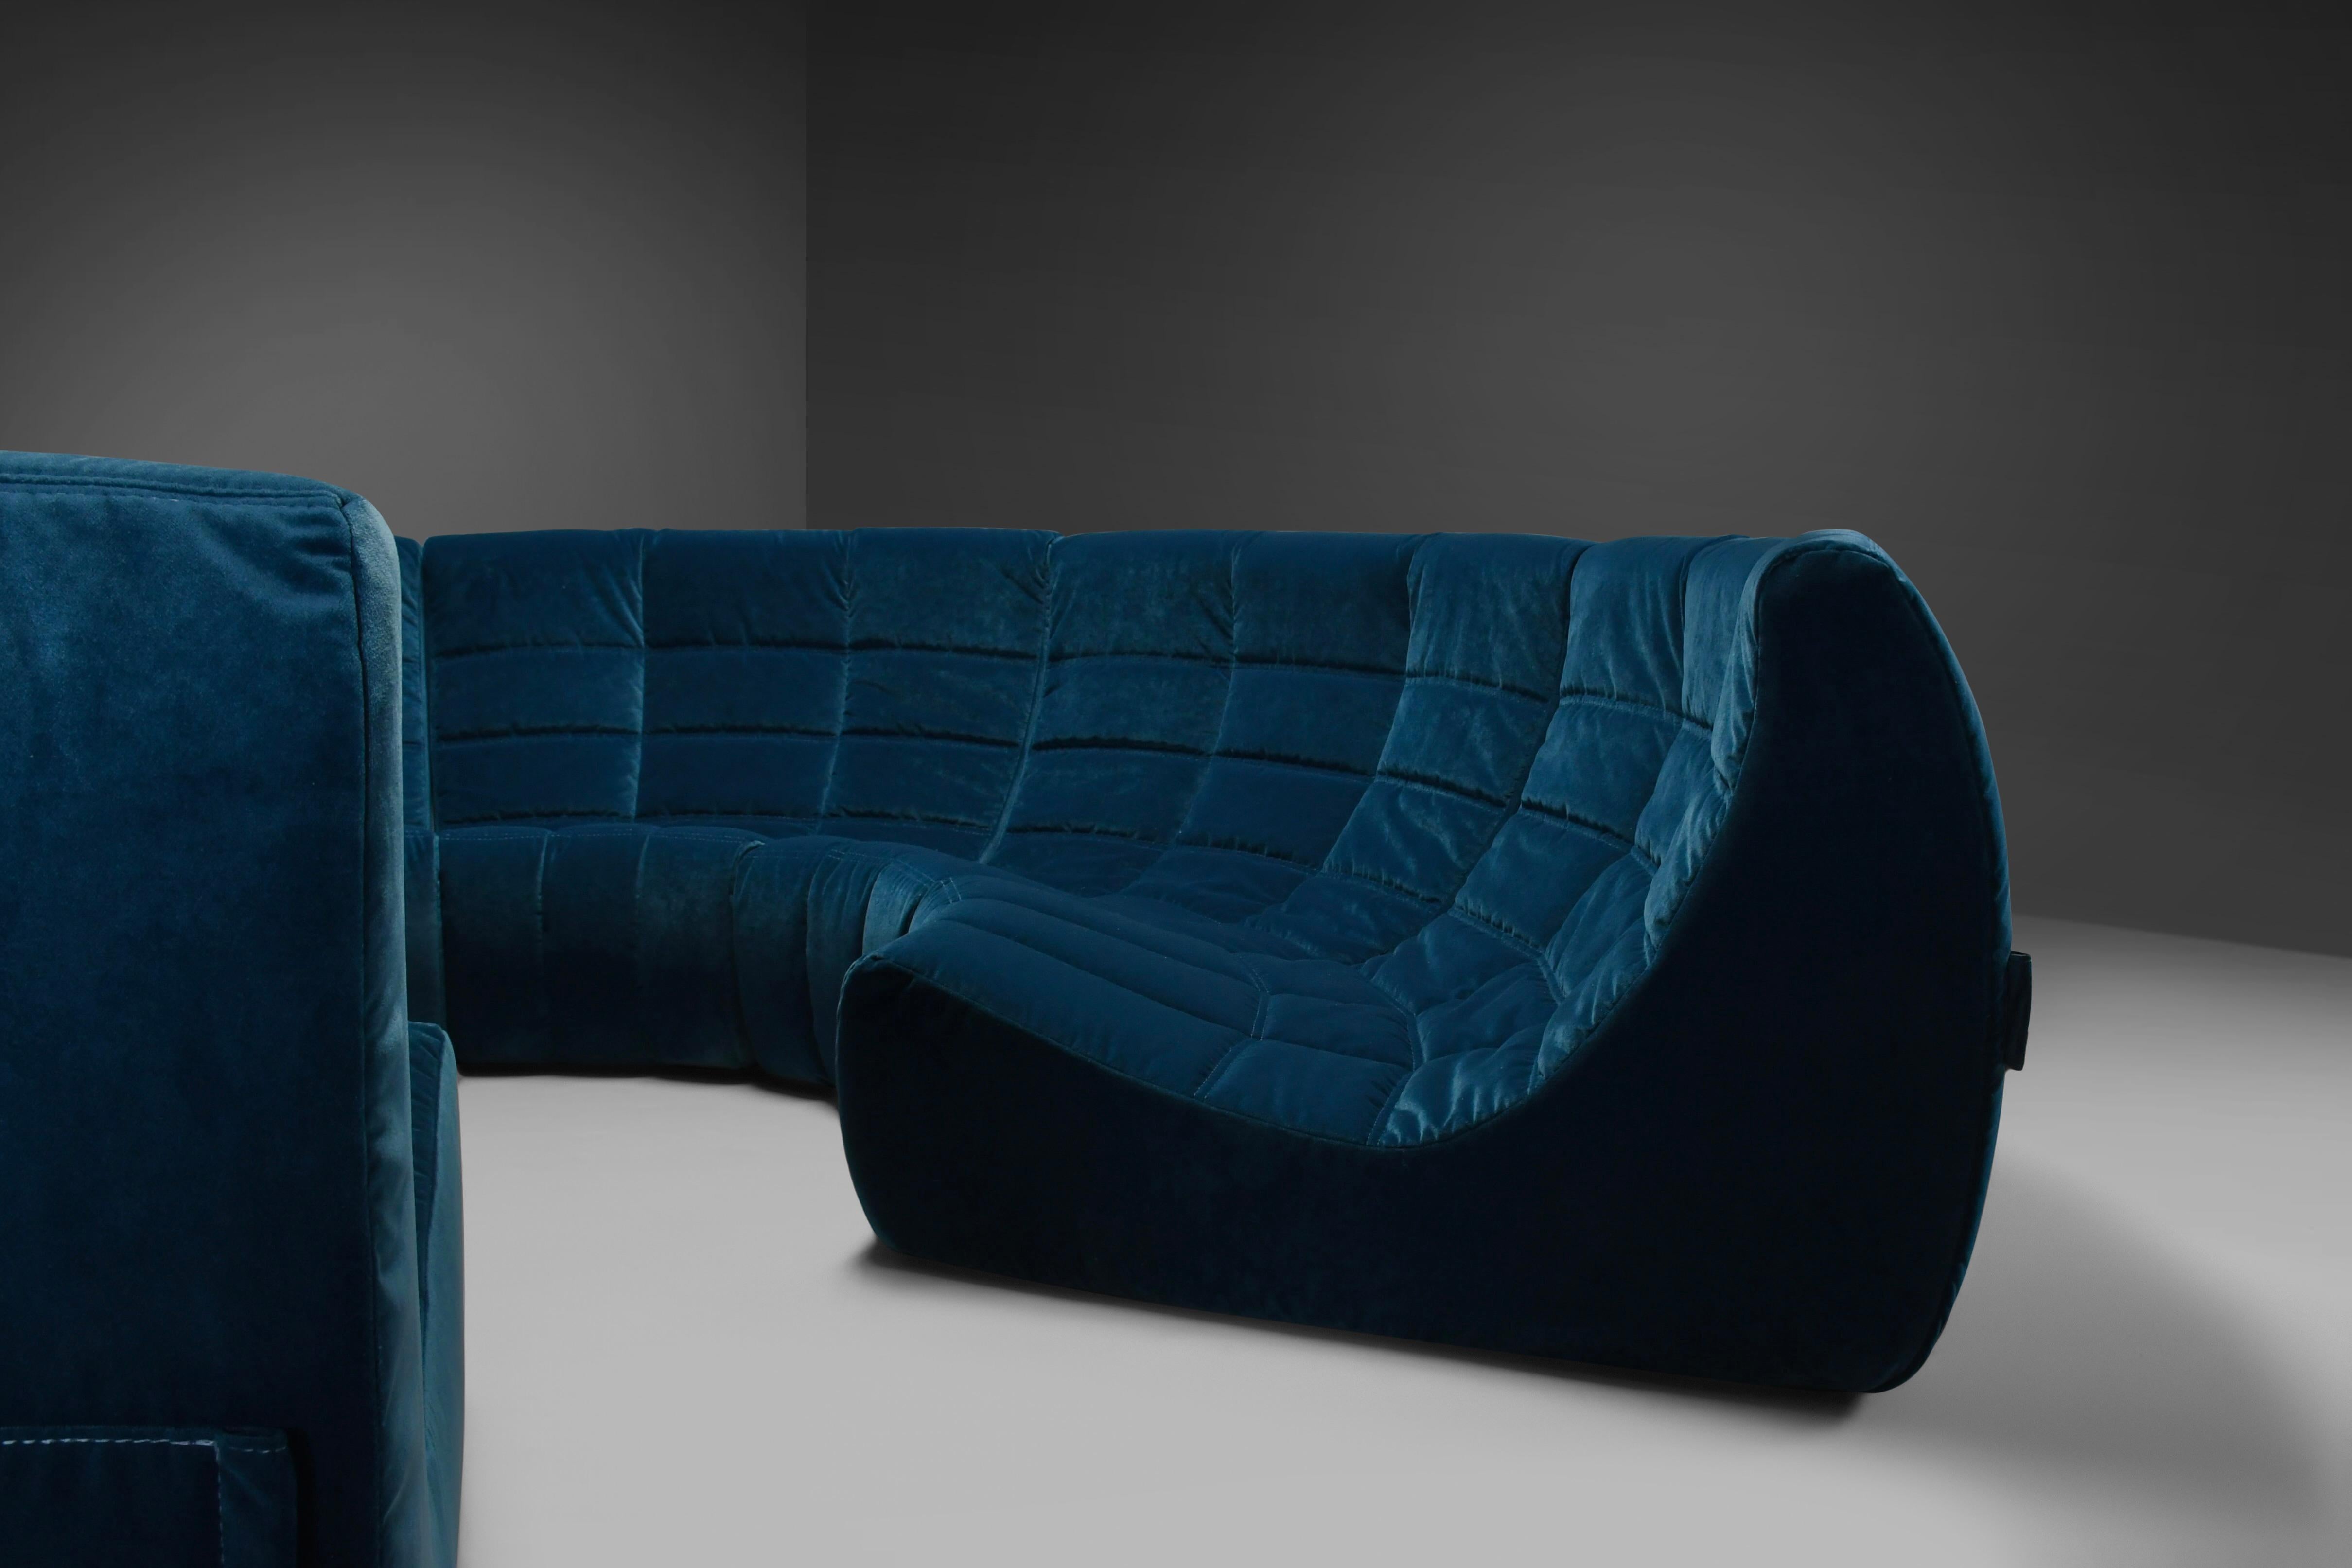 Metal Rare and Exceptional 'Gilda' Circle Sofa in Velvet by Michel Ducaroy, 1972 For Sale